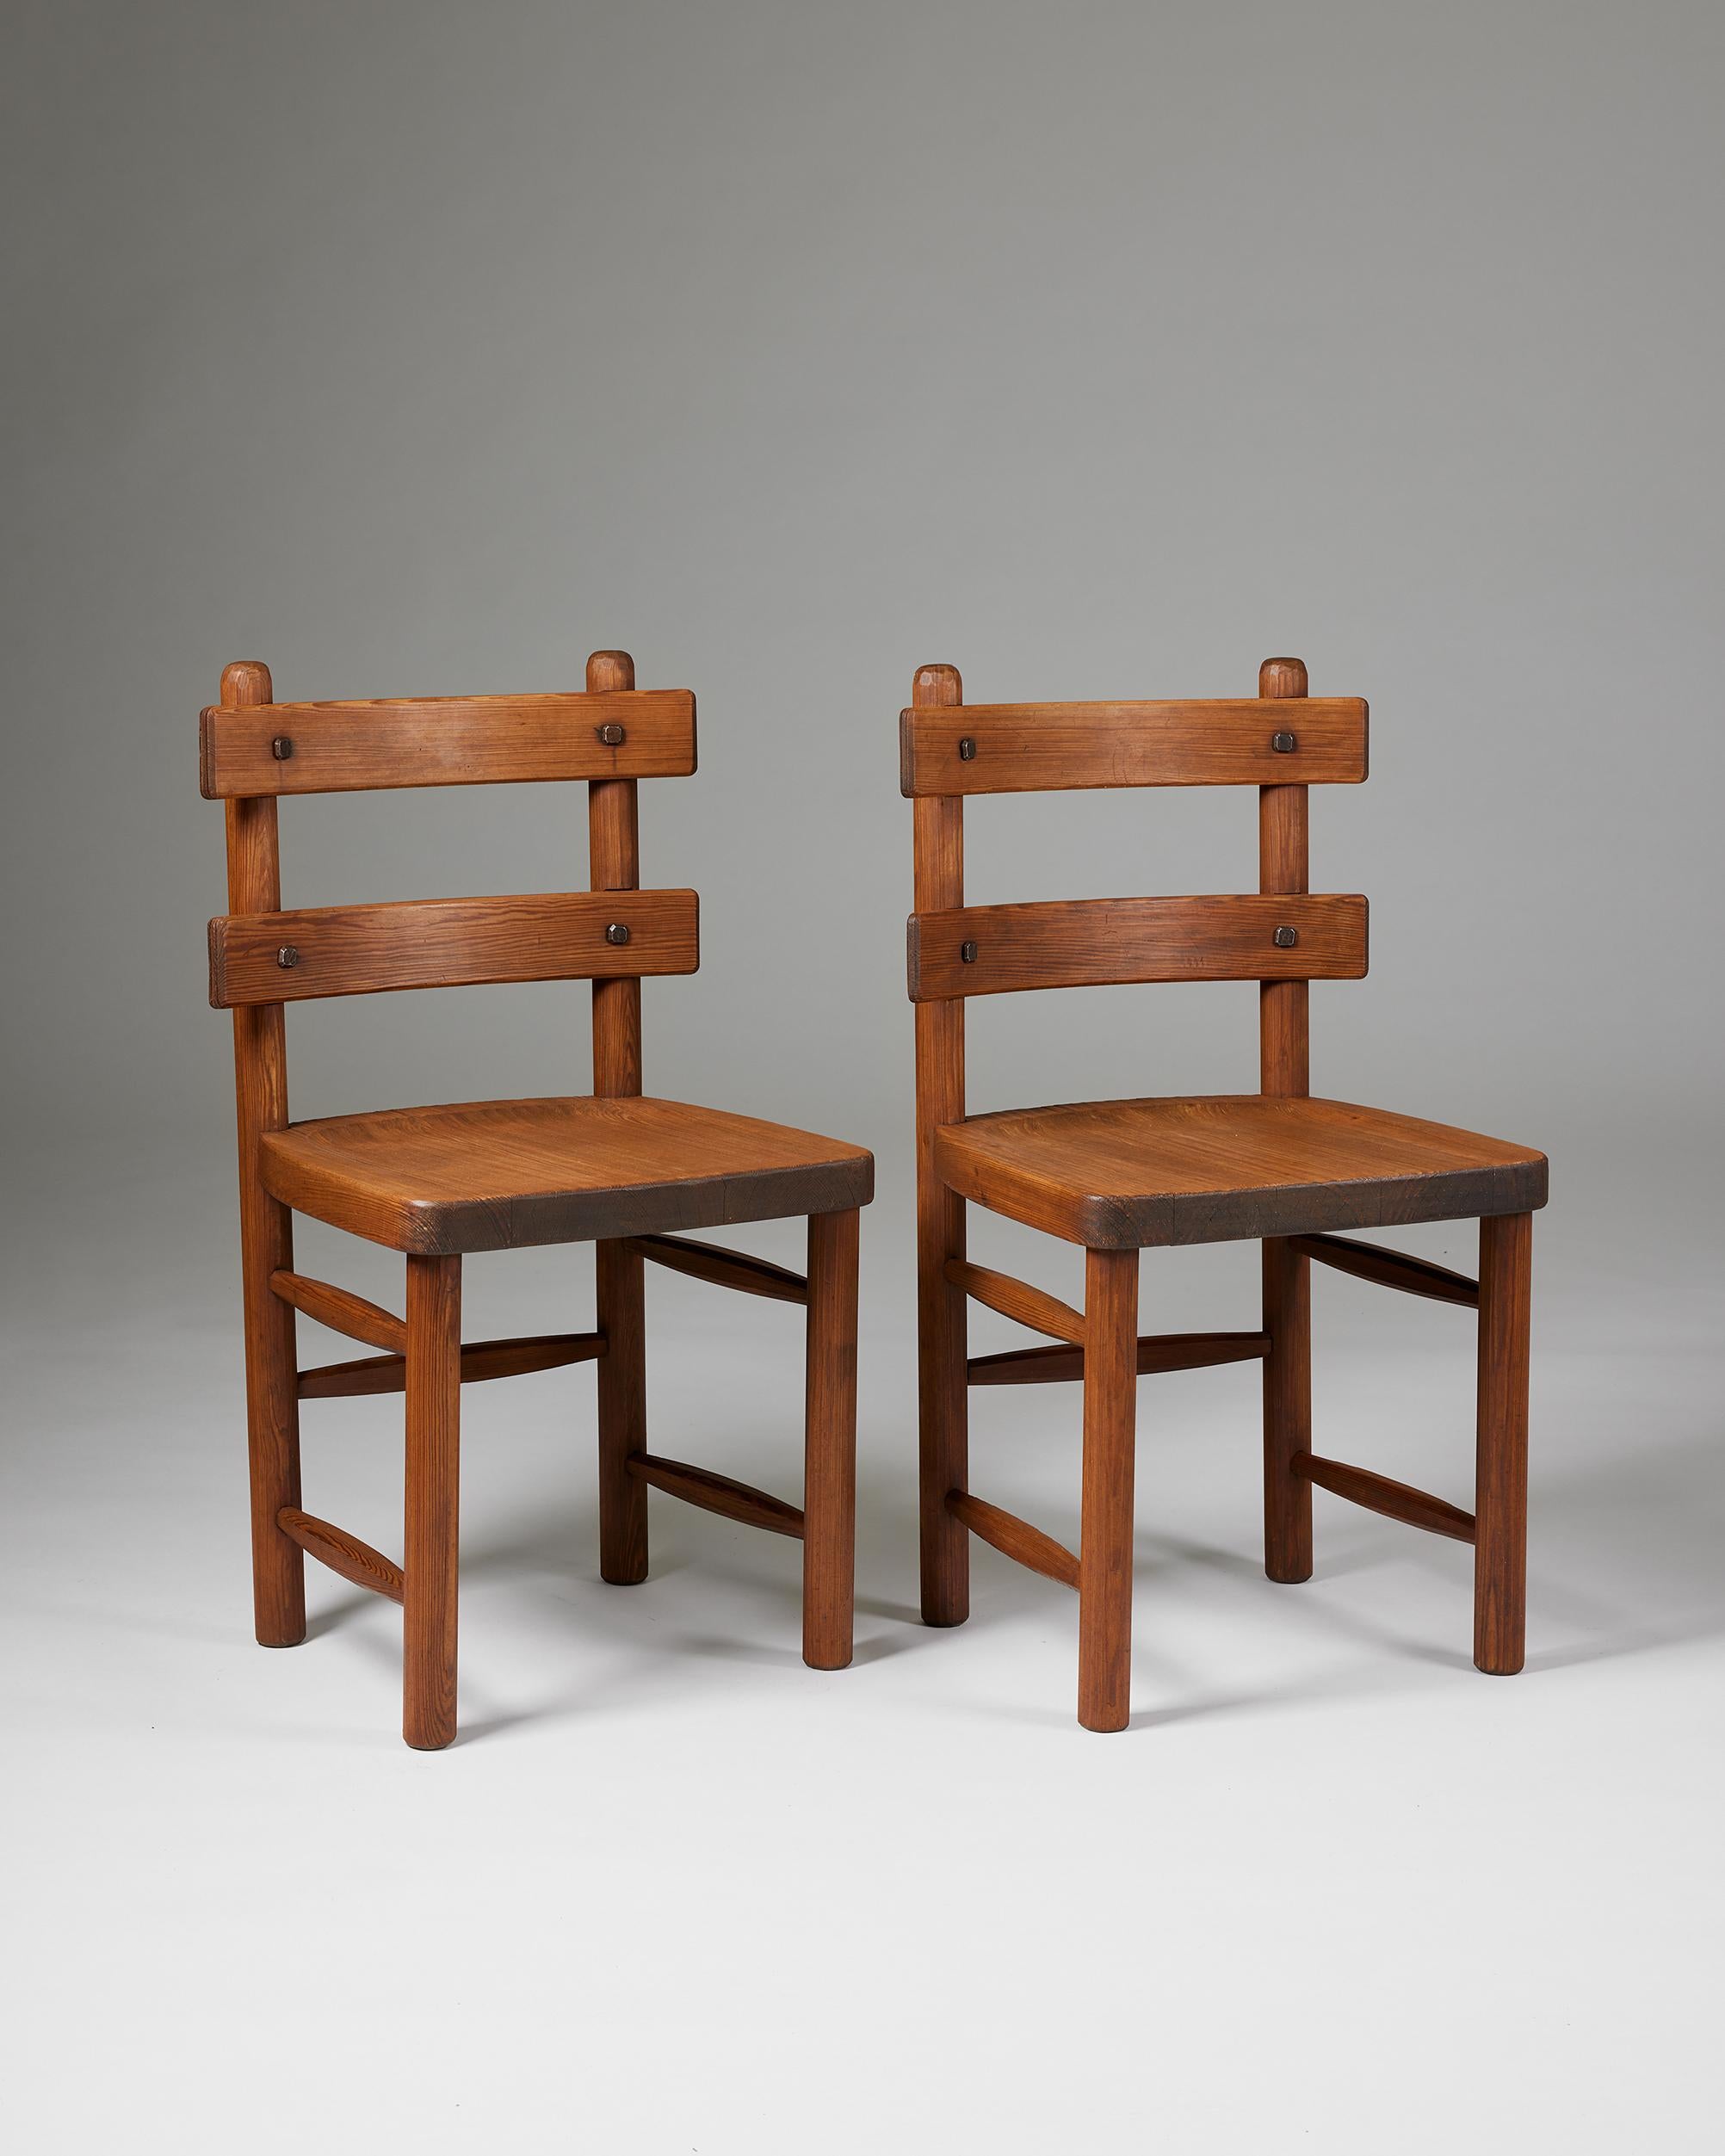 Pair of ‘Sandhamn’ chairs designed by Axel Einar Hjorth for Nordiska Kompaniet,
Sweden, 1932.

Hand-carved solid pine, and iron hardware.

Marked.

H: 86.5 cm / 2' 10''
W: 49.5 cm / 19 1/2''
D: 41 cm / 16''
SH: 45.5 cm / 18''